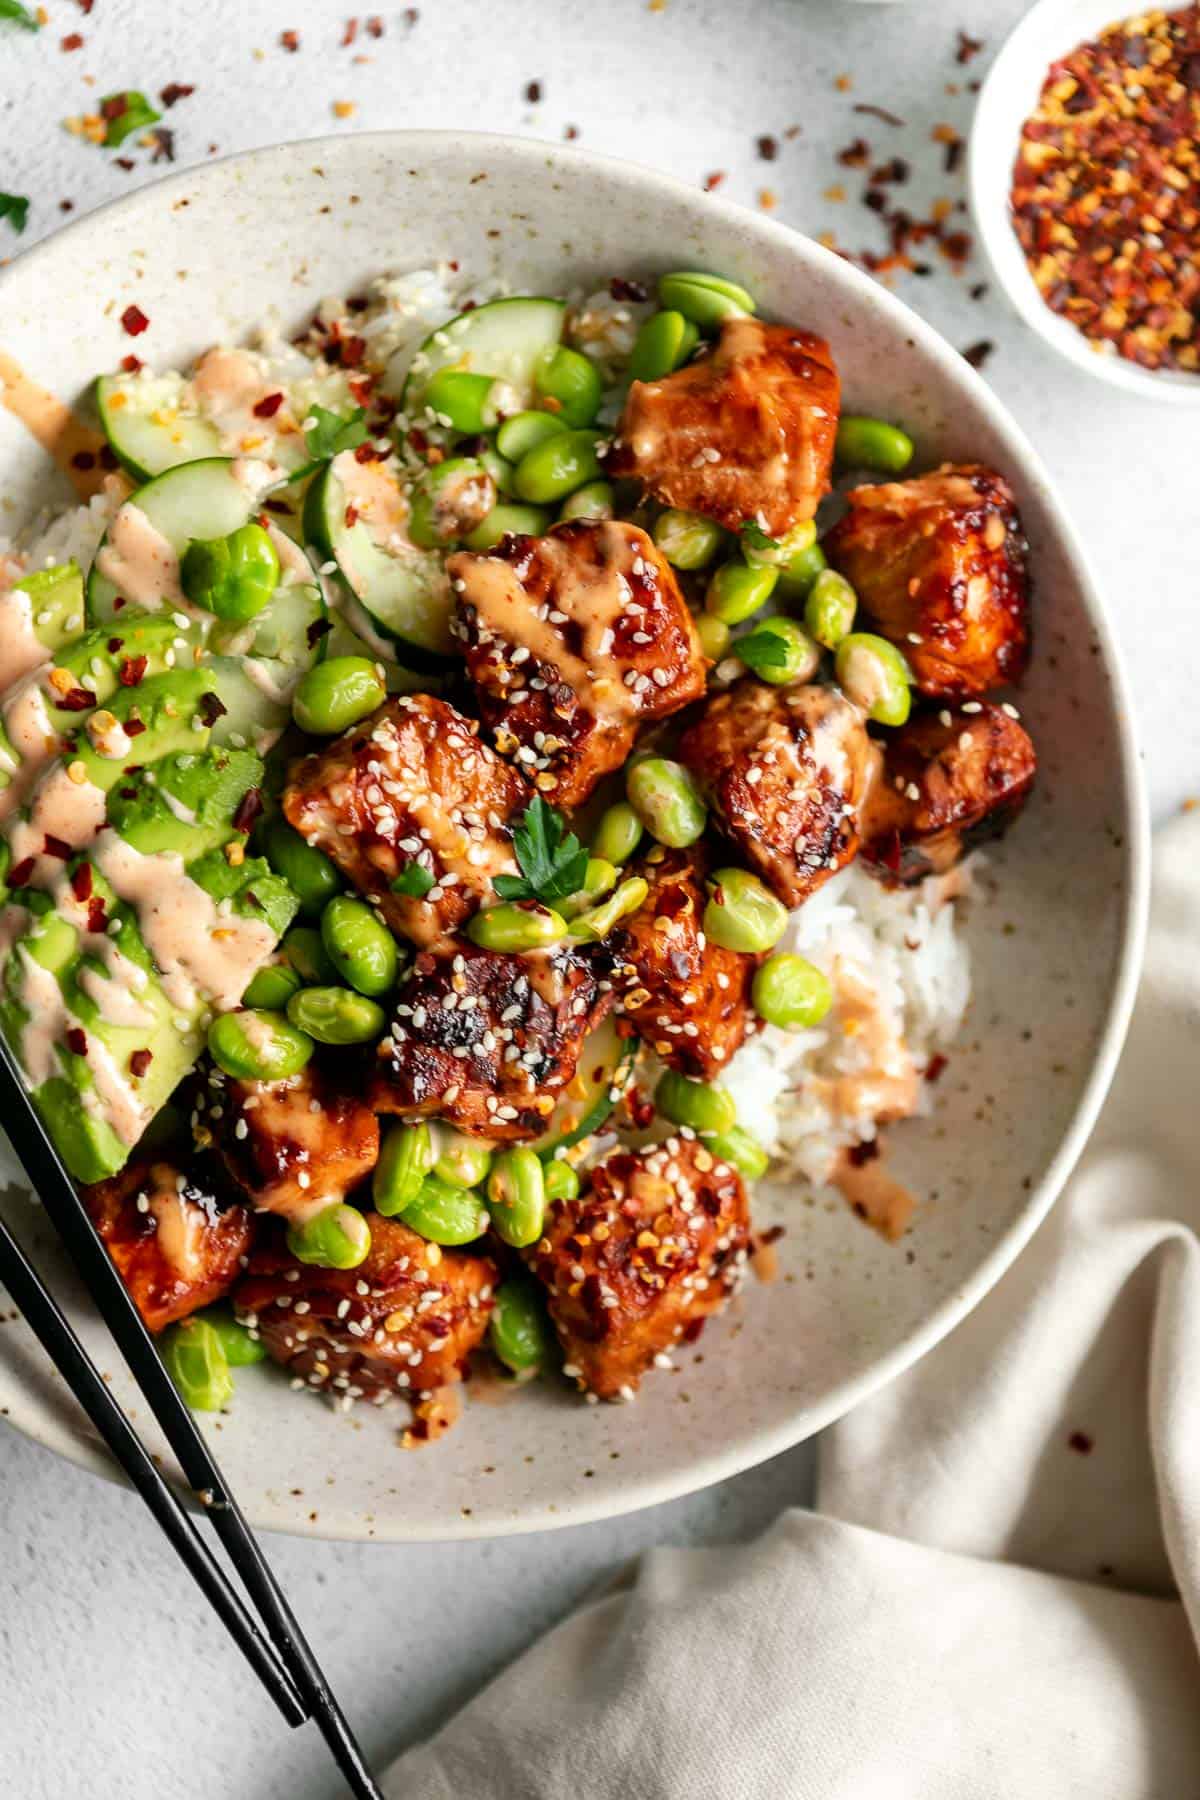 sriracha salmon cut into cubes in a bowl with edamame